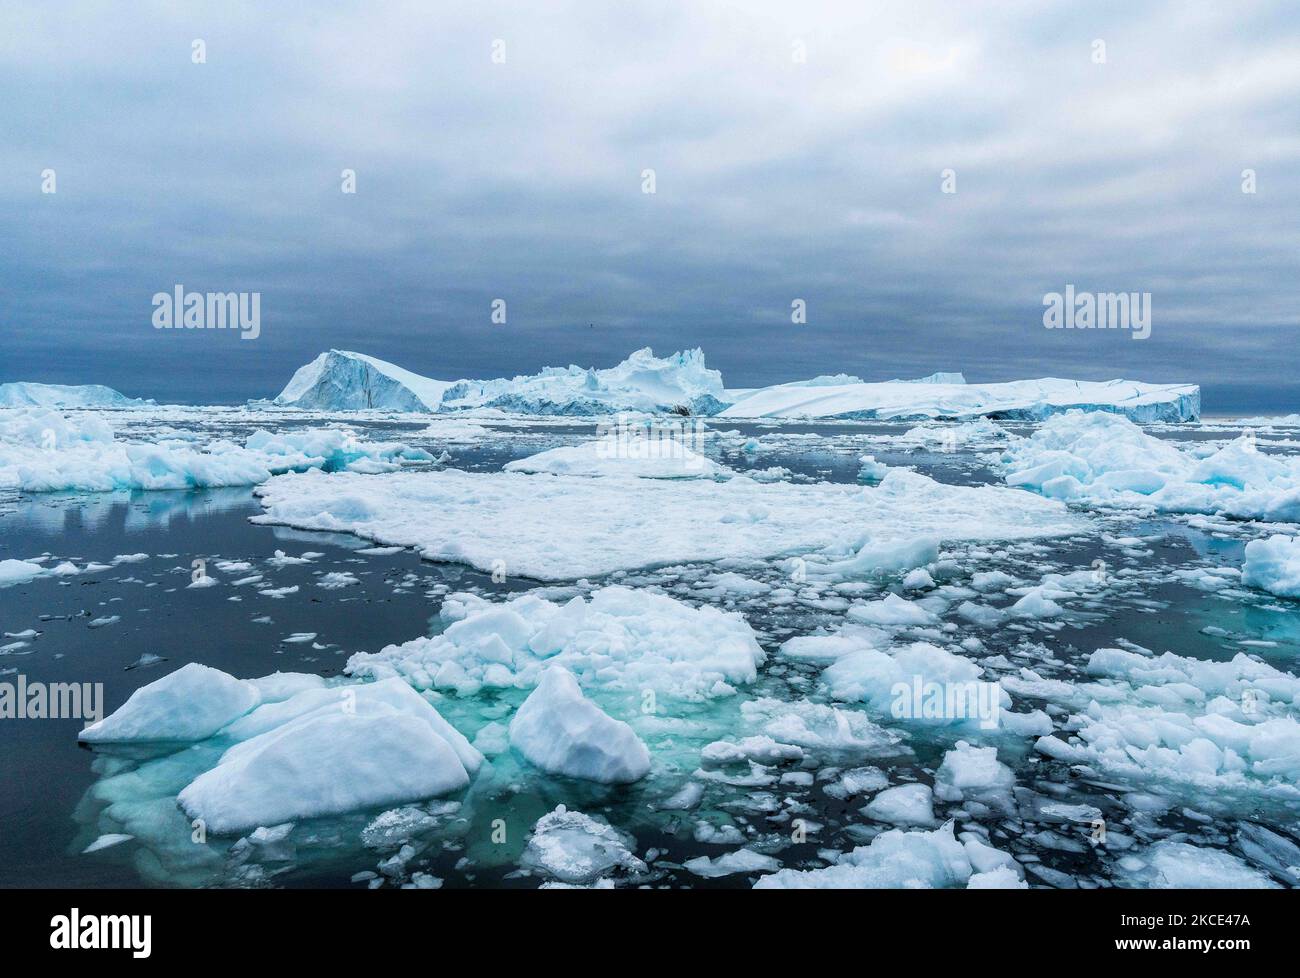 Icebergs near Ilulissat, Greenland. Climate change is having a profound ...